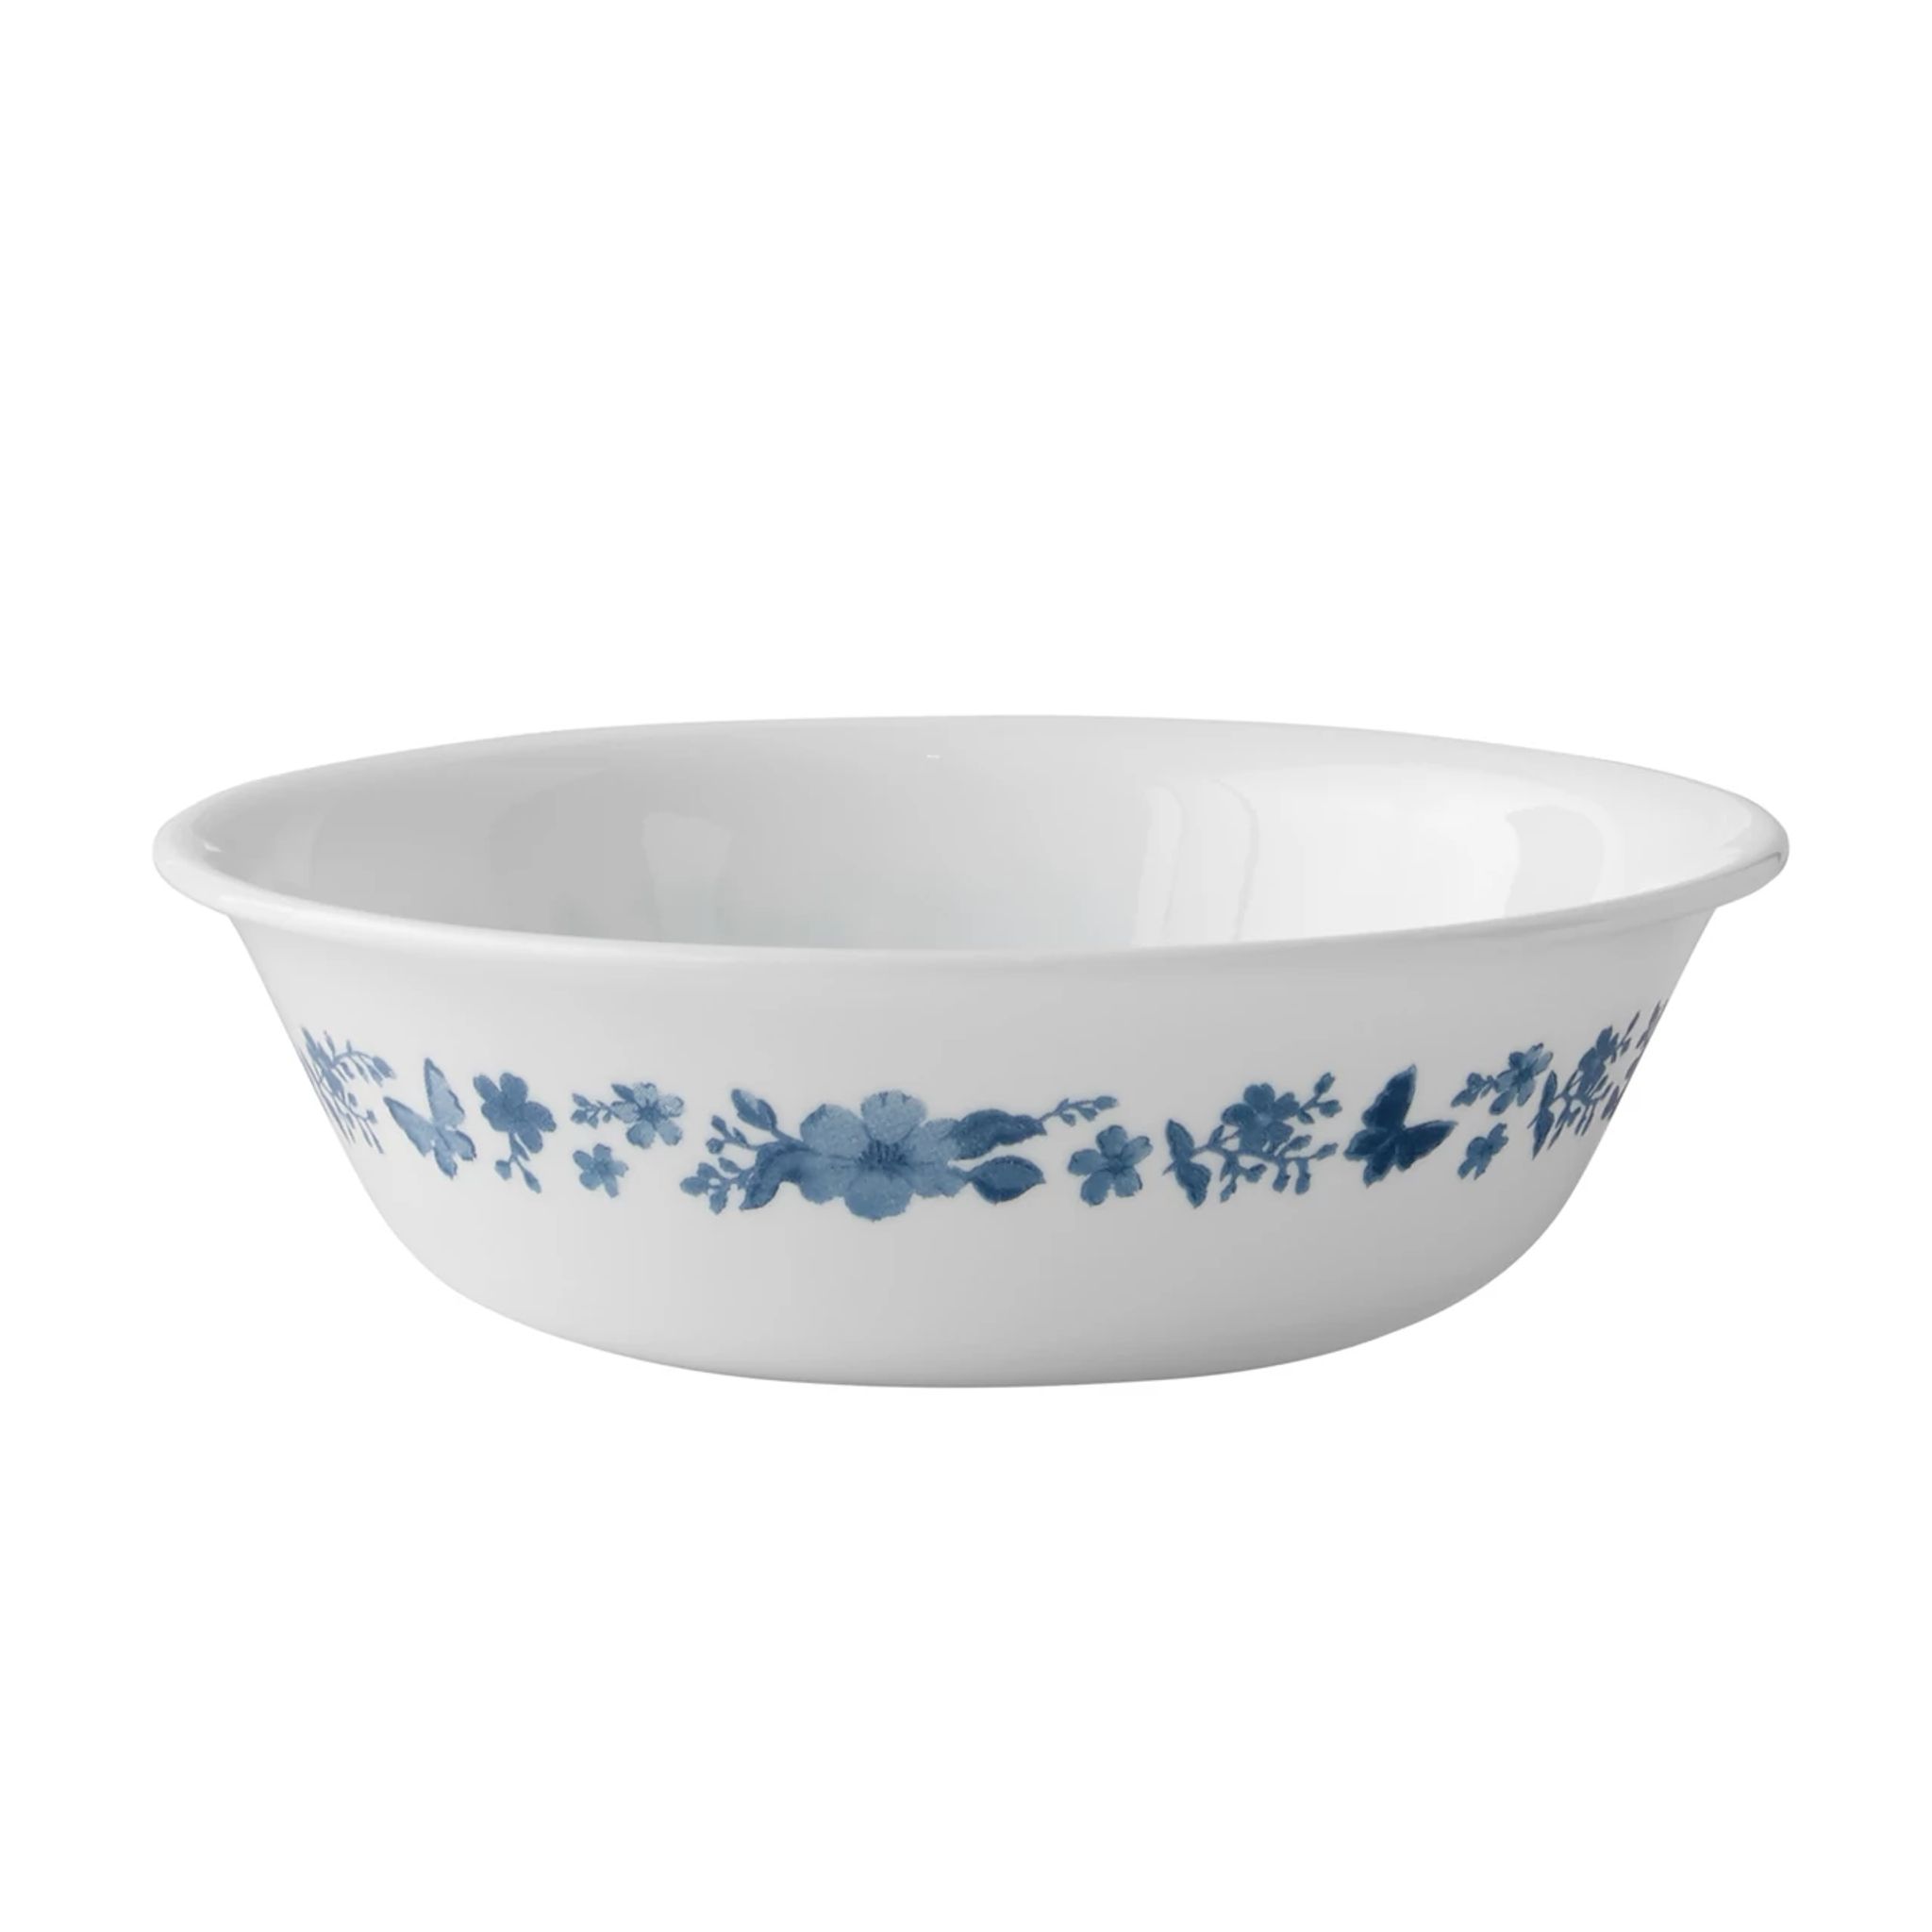 The Pioneer Woman 18-ounce Cereal Bowl, Evie, Blue